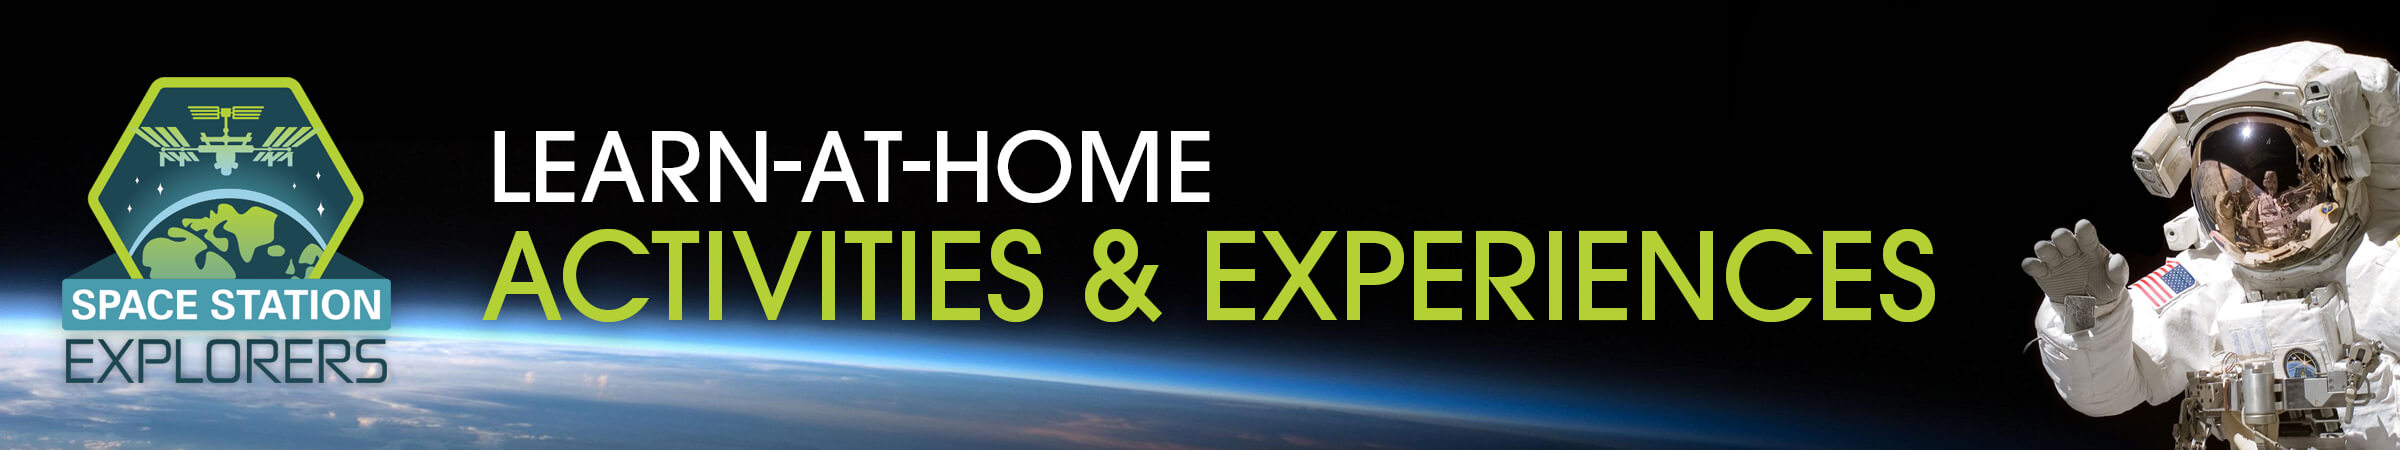 Learn at Home Activities and Experiences from Space Station Explorers